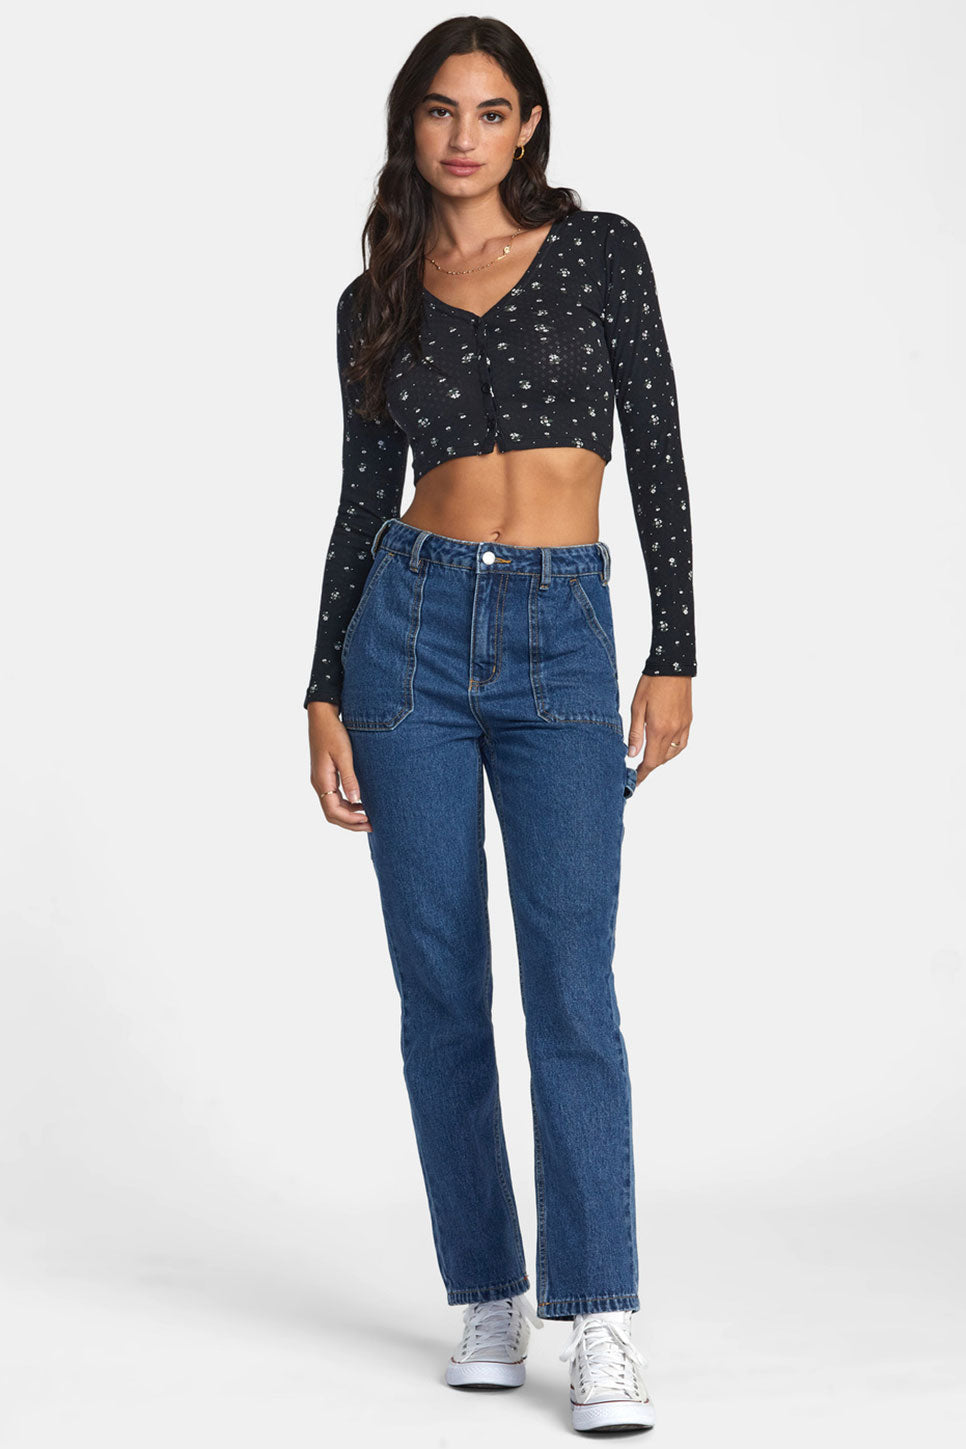 RVCA - Homecoming Top Pointelle - RVCA Black